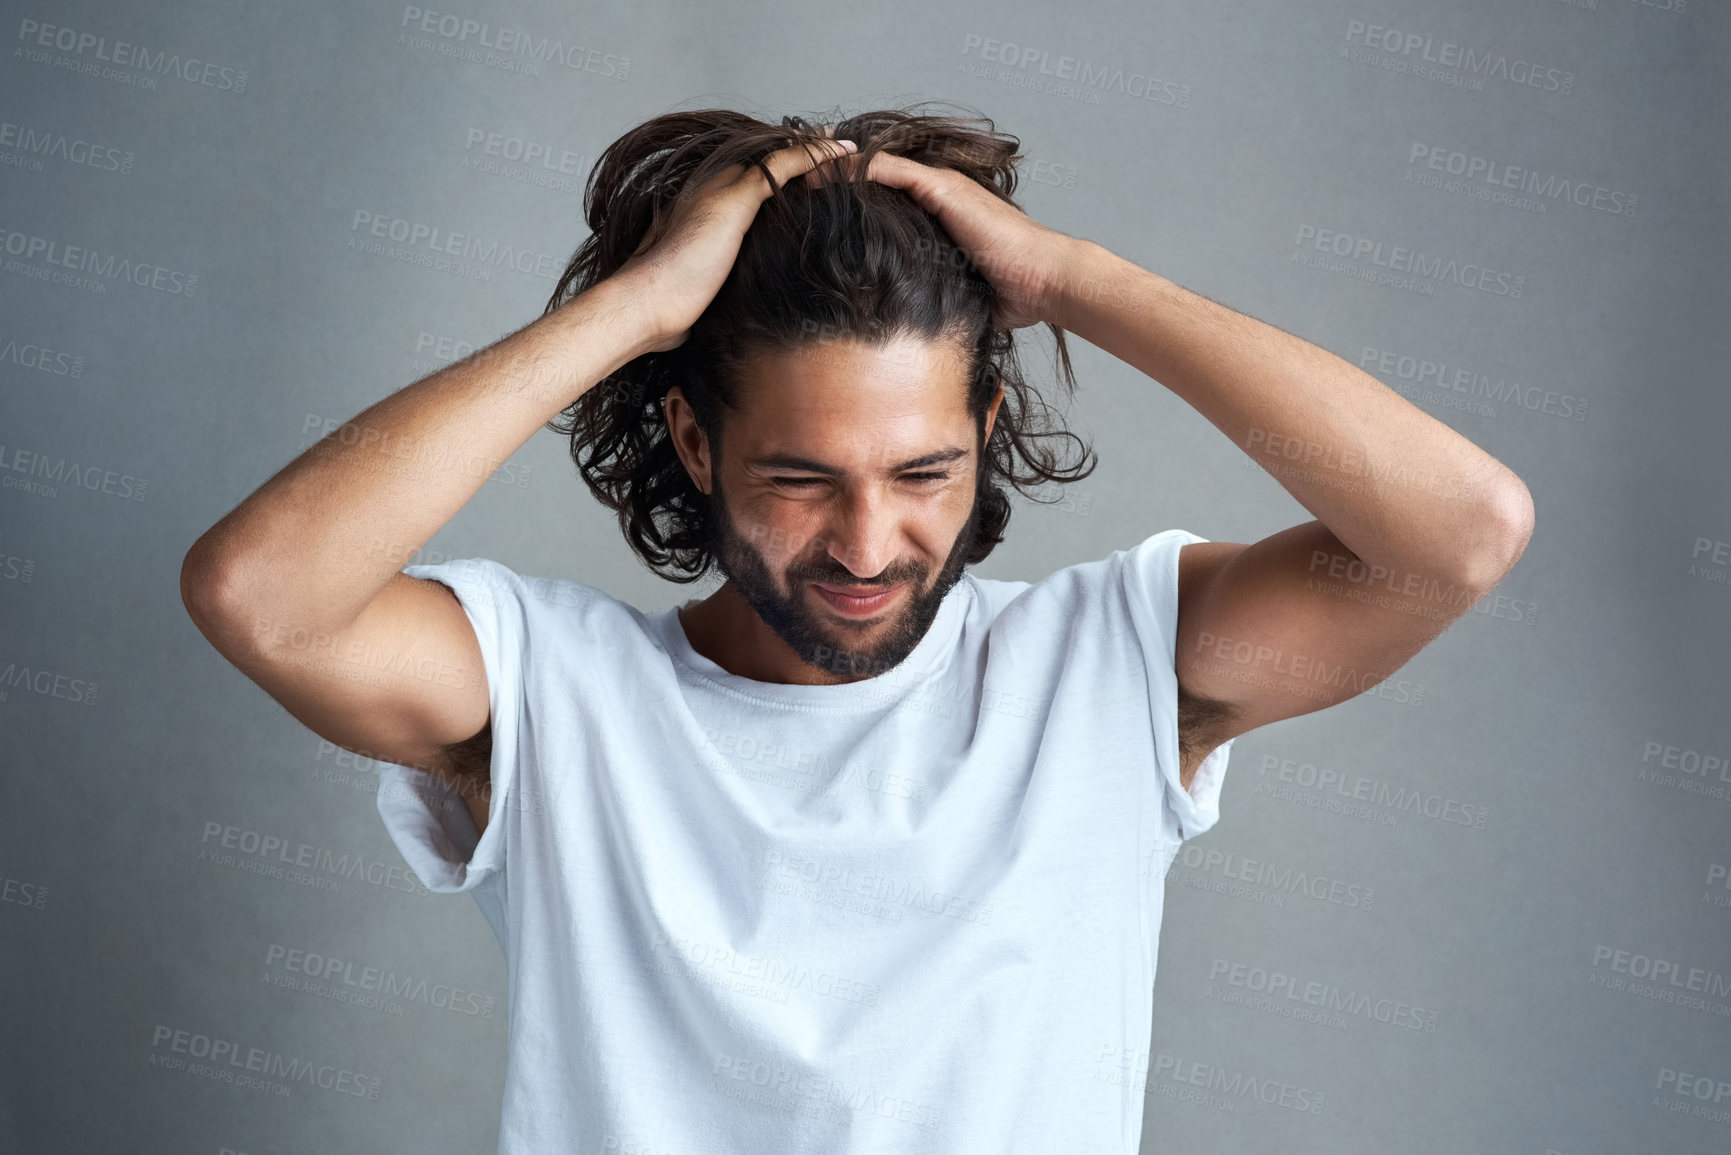 Buy stock photo Studio shot of a young man looking frustrated against a grey background